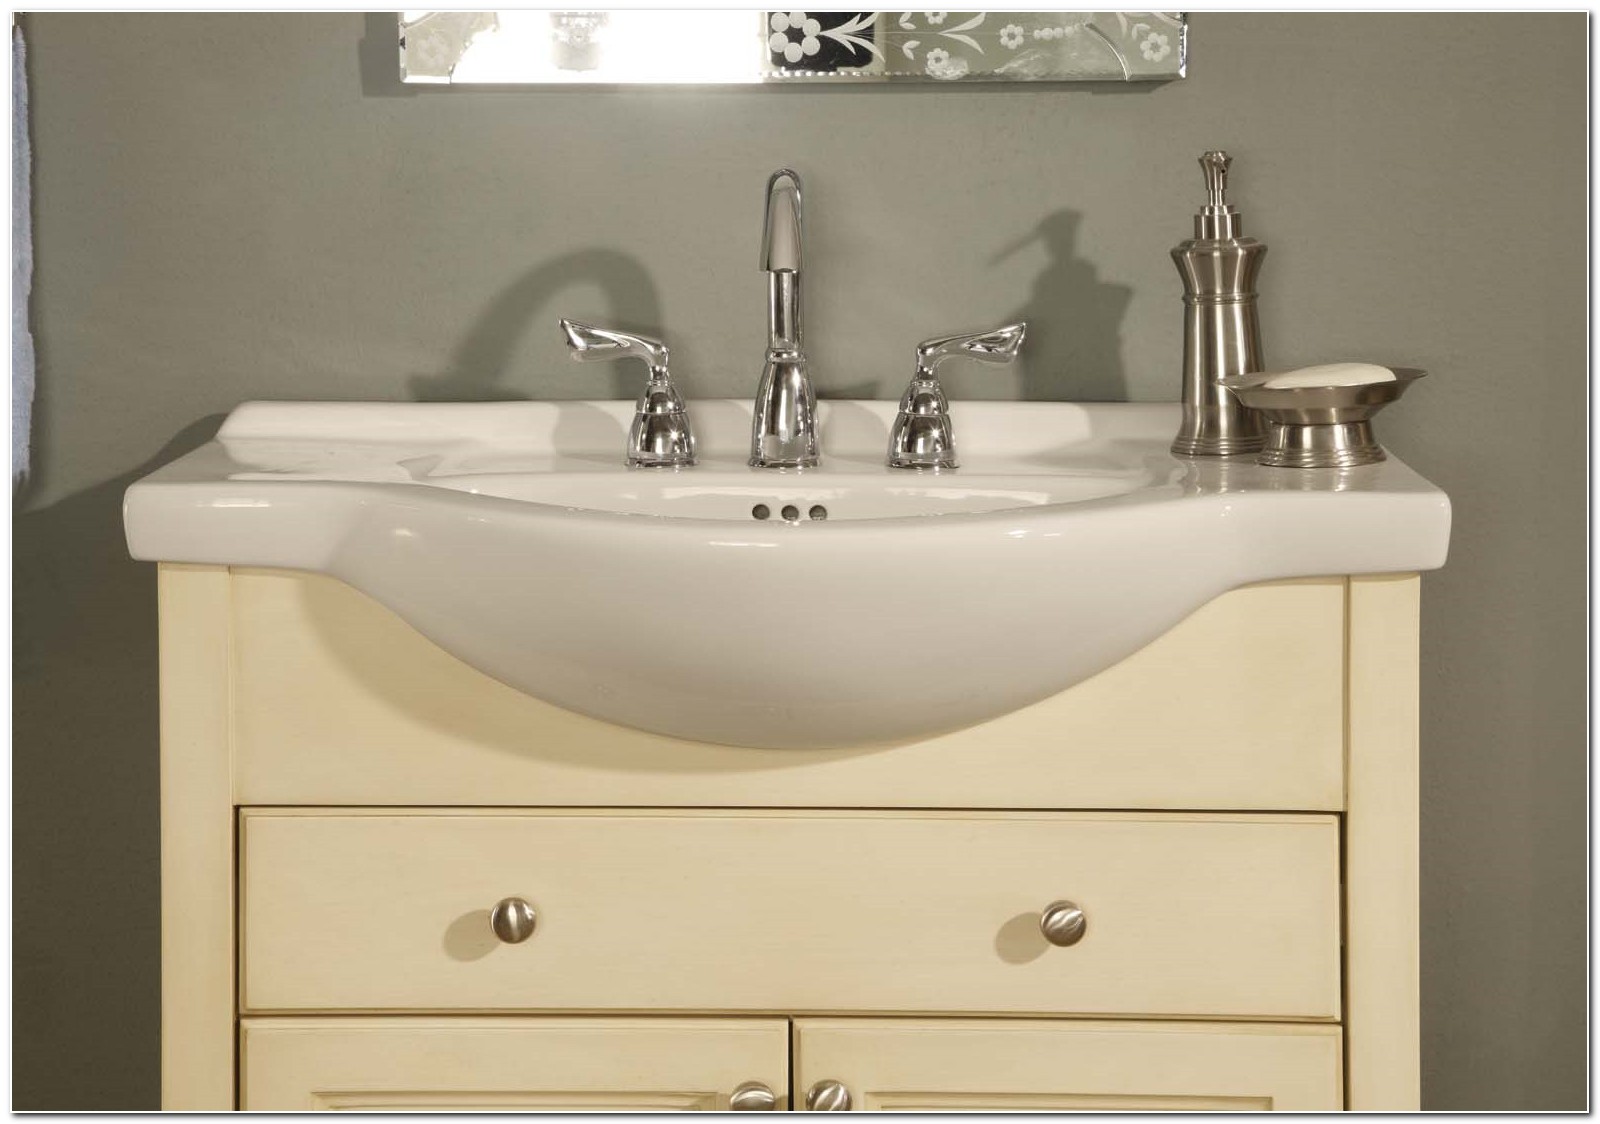 bathroom sink to fit 36 inch cabinet